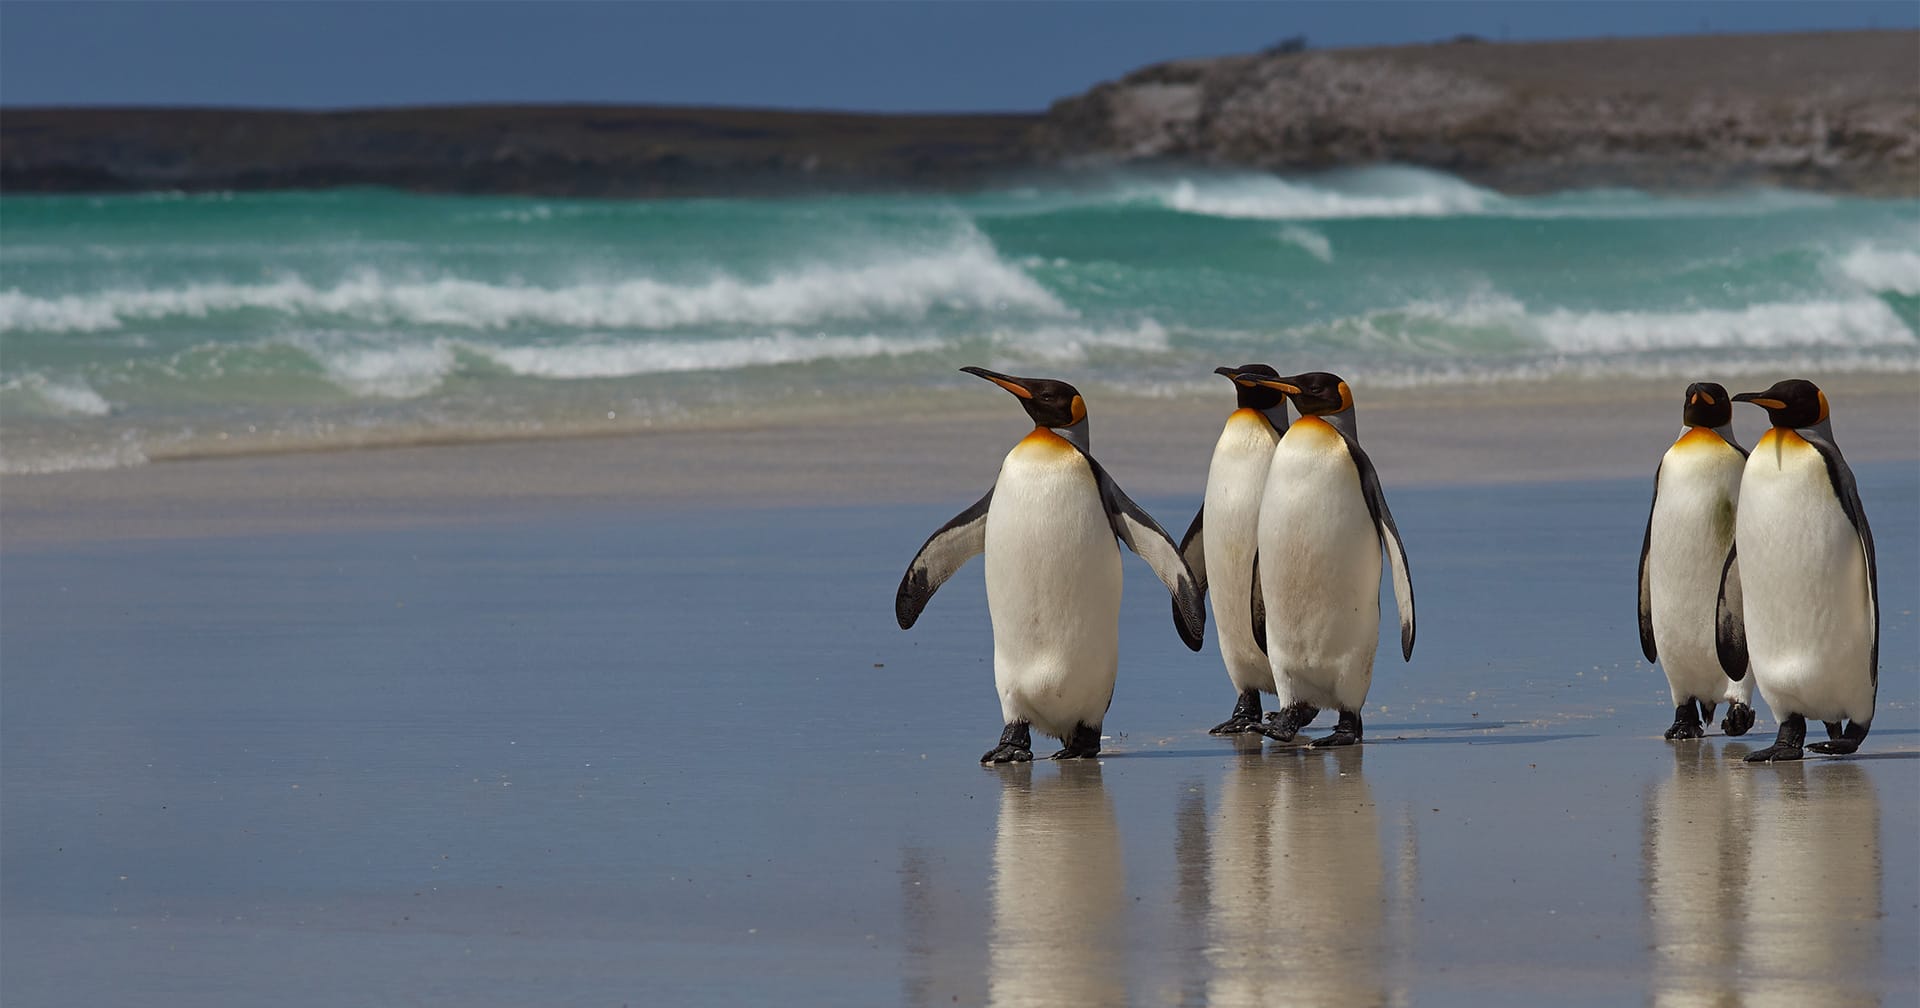 A group of penguins walking on a beach

Description automatically generated